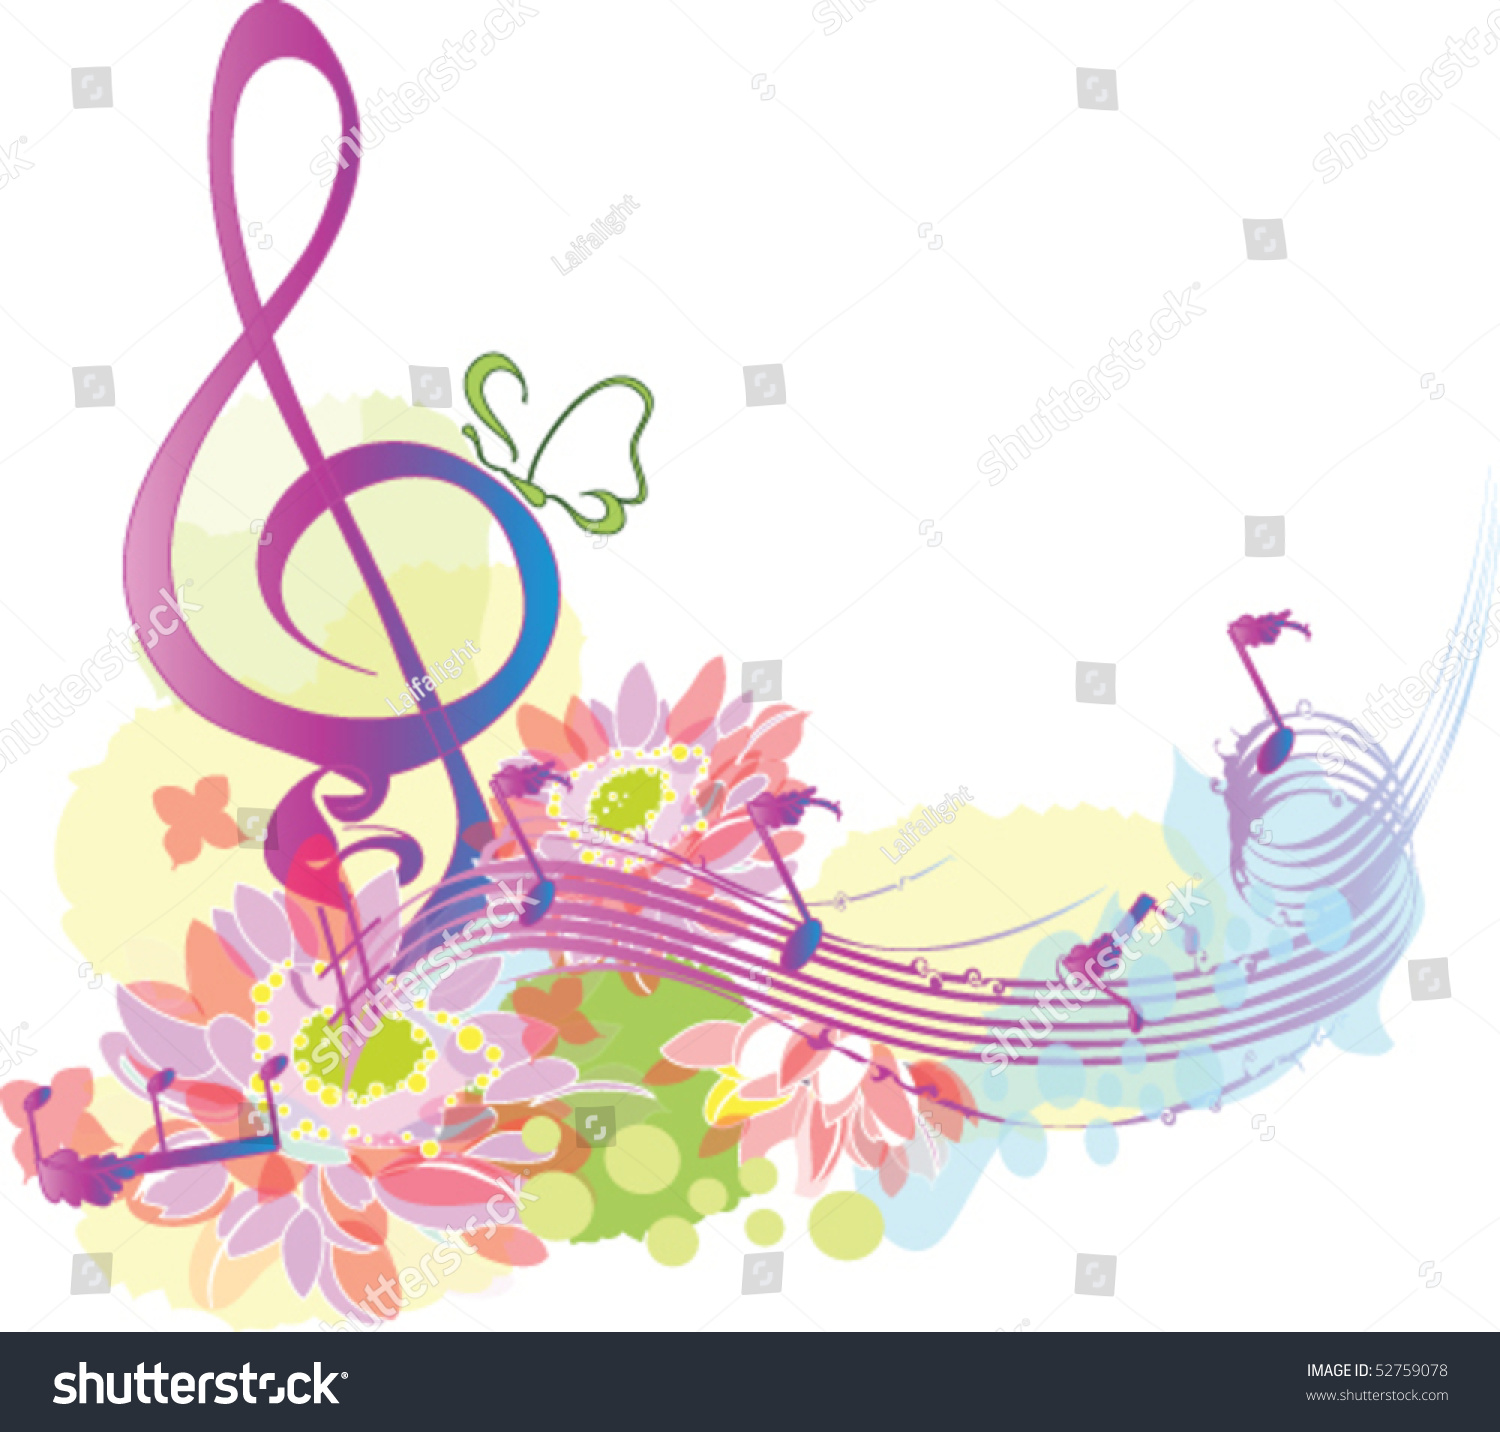 spring concert clipart - photo #34